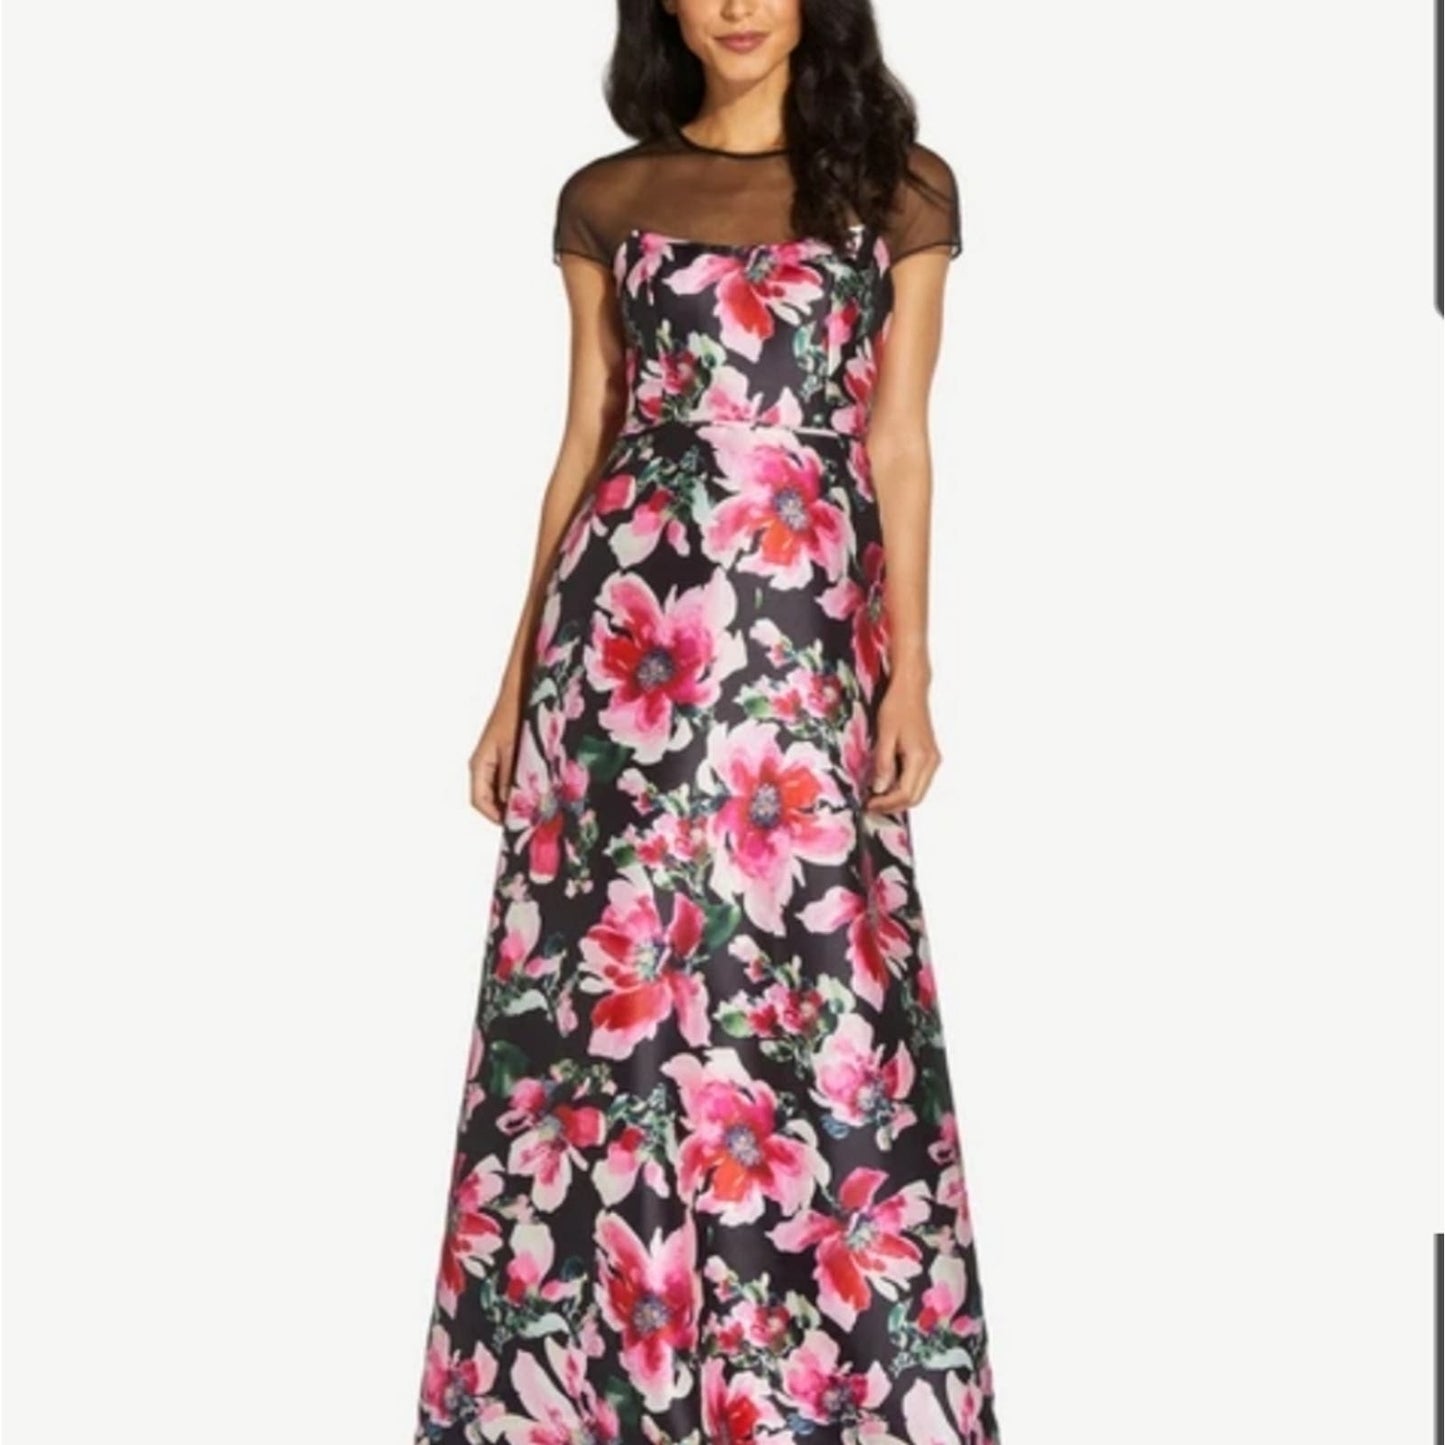 Adrianna Papell Sheer Neckline Pink and Black Floral Mikado Evening Gown